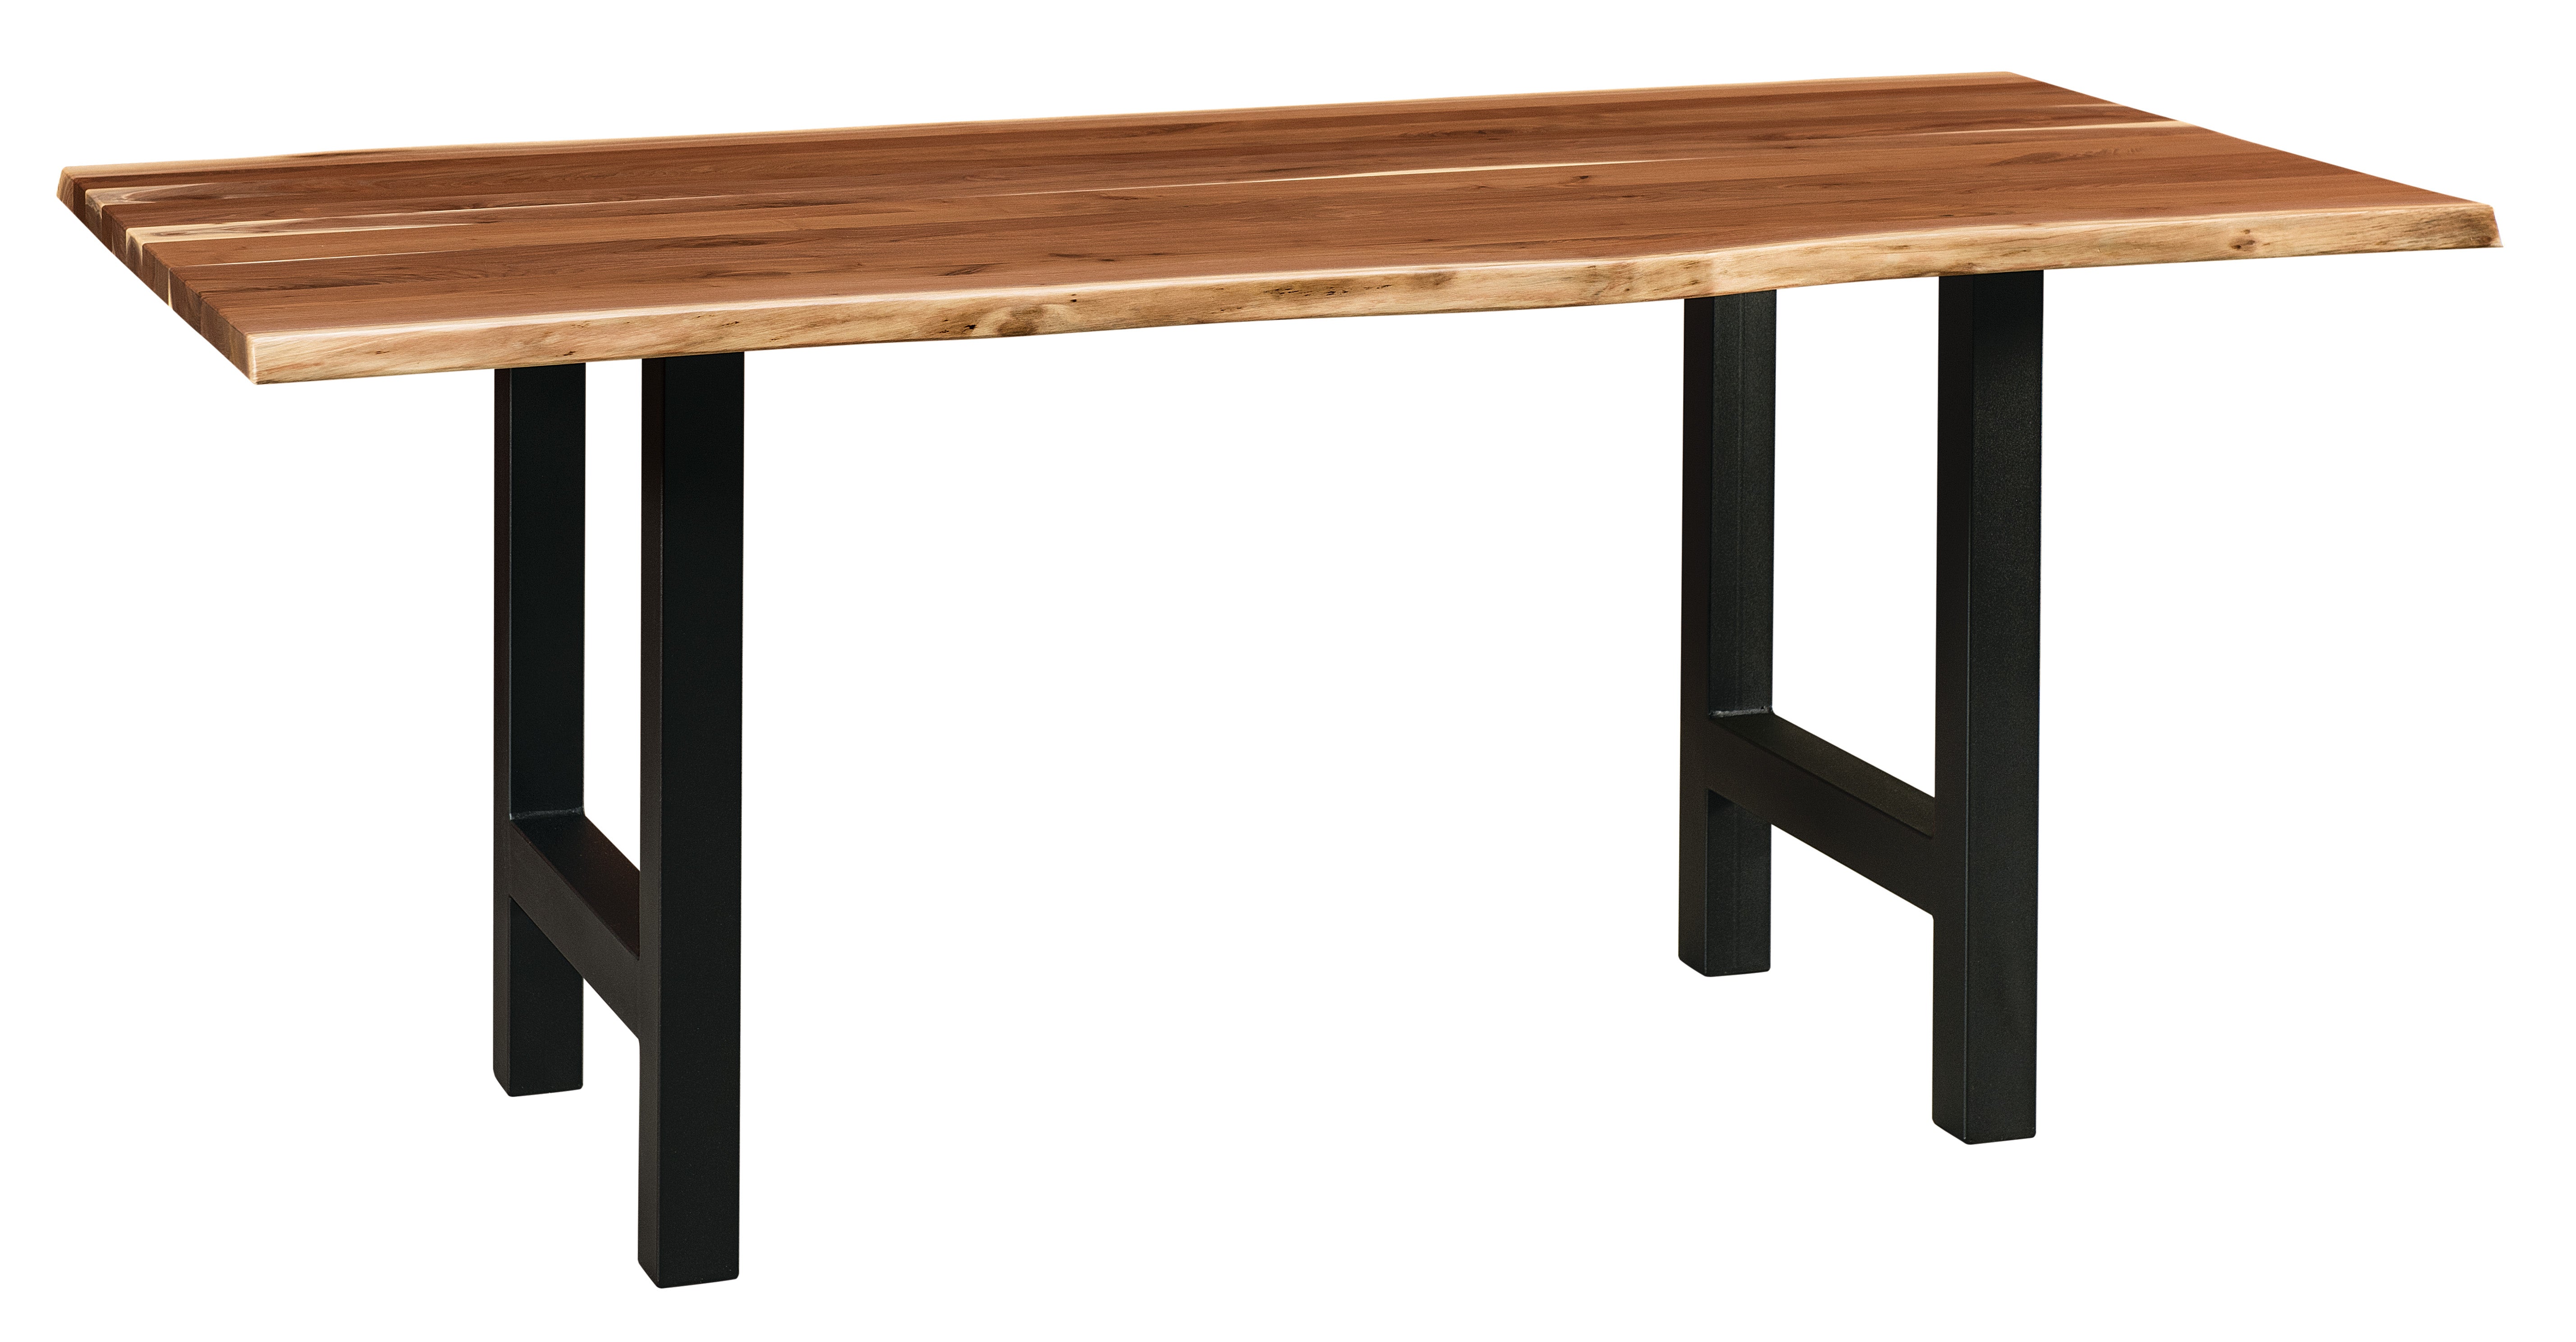 martin trestle pub table shown in rustic walnut with a natural finish with a black powder coated metal base